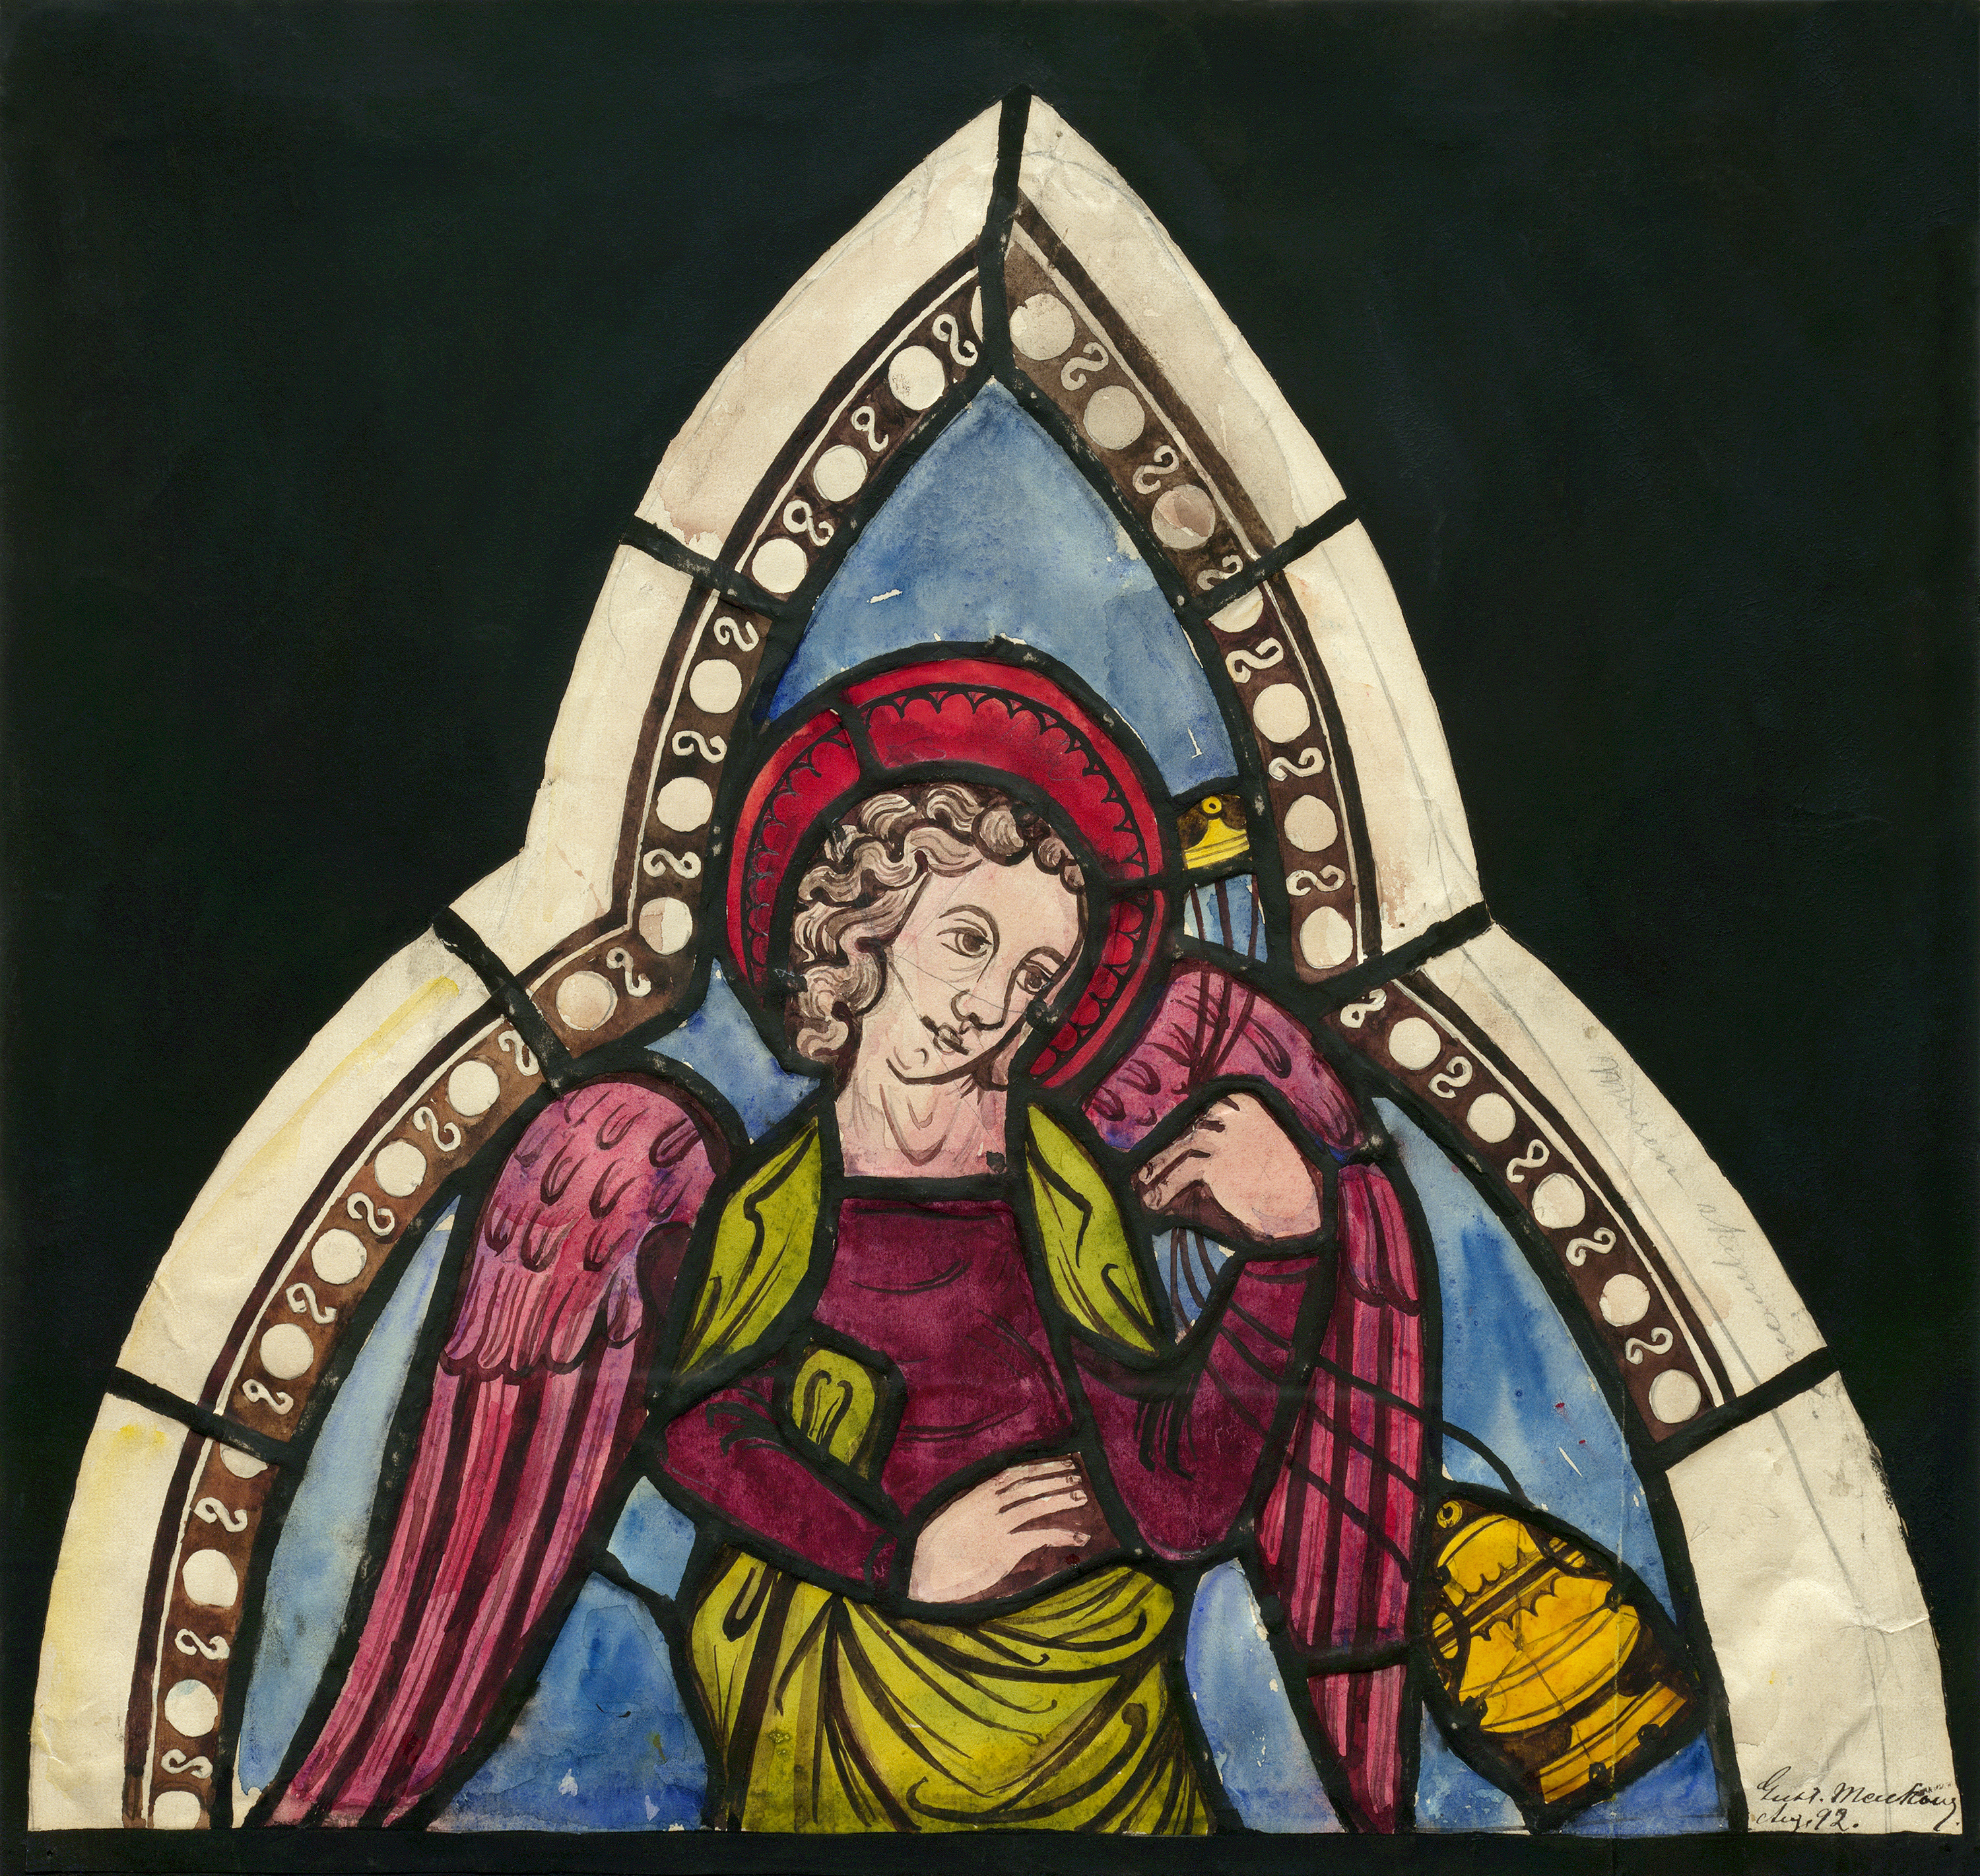 Angel. Depiction of medieval stained glass window in Hejde Church, Gotland, Sweden